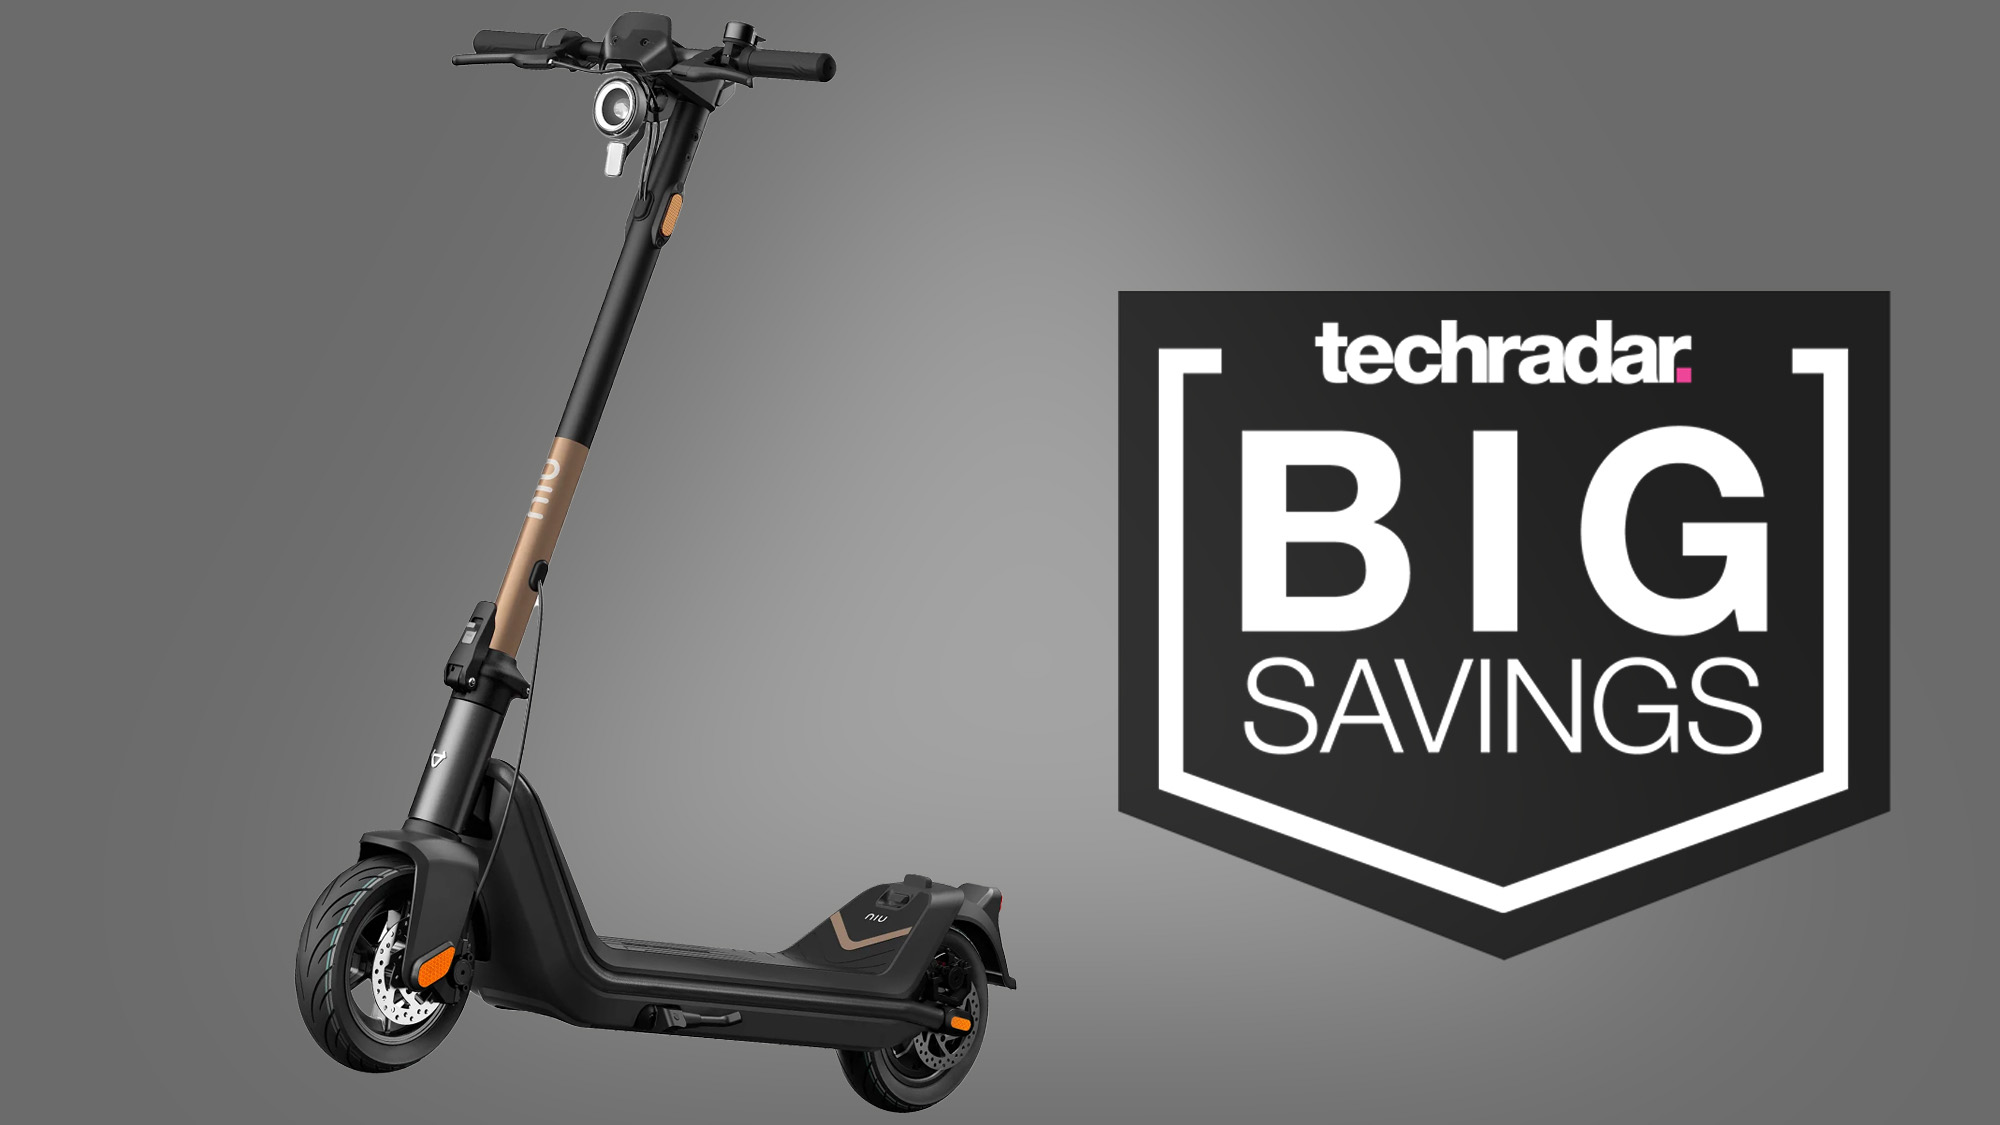 Our favorite electric scooter is 200 off for an early Black Friday